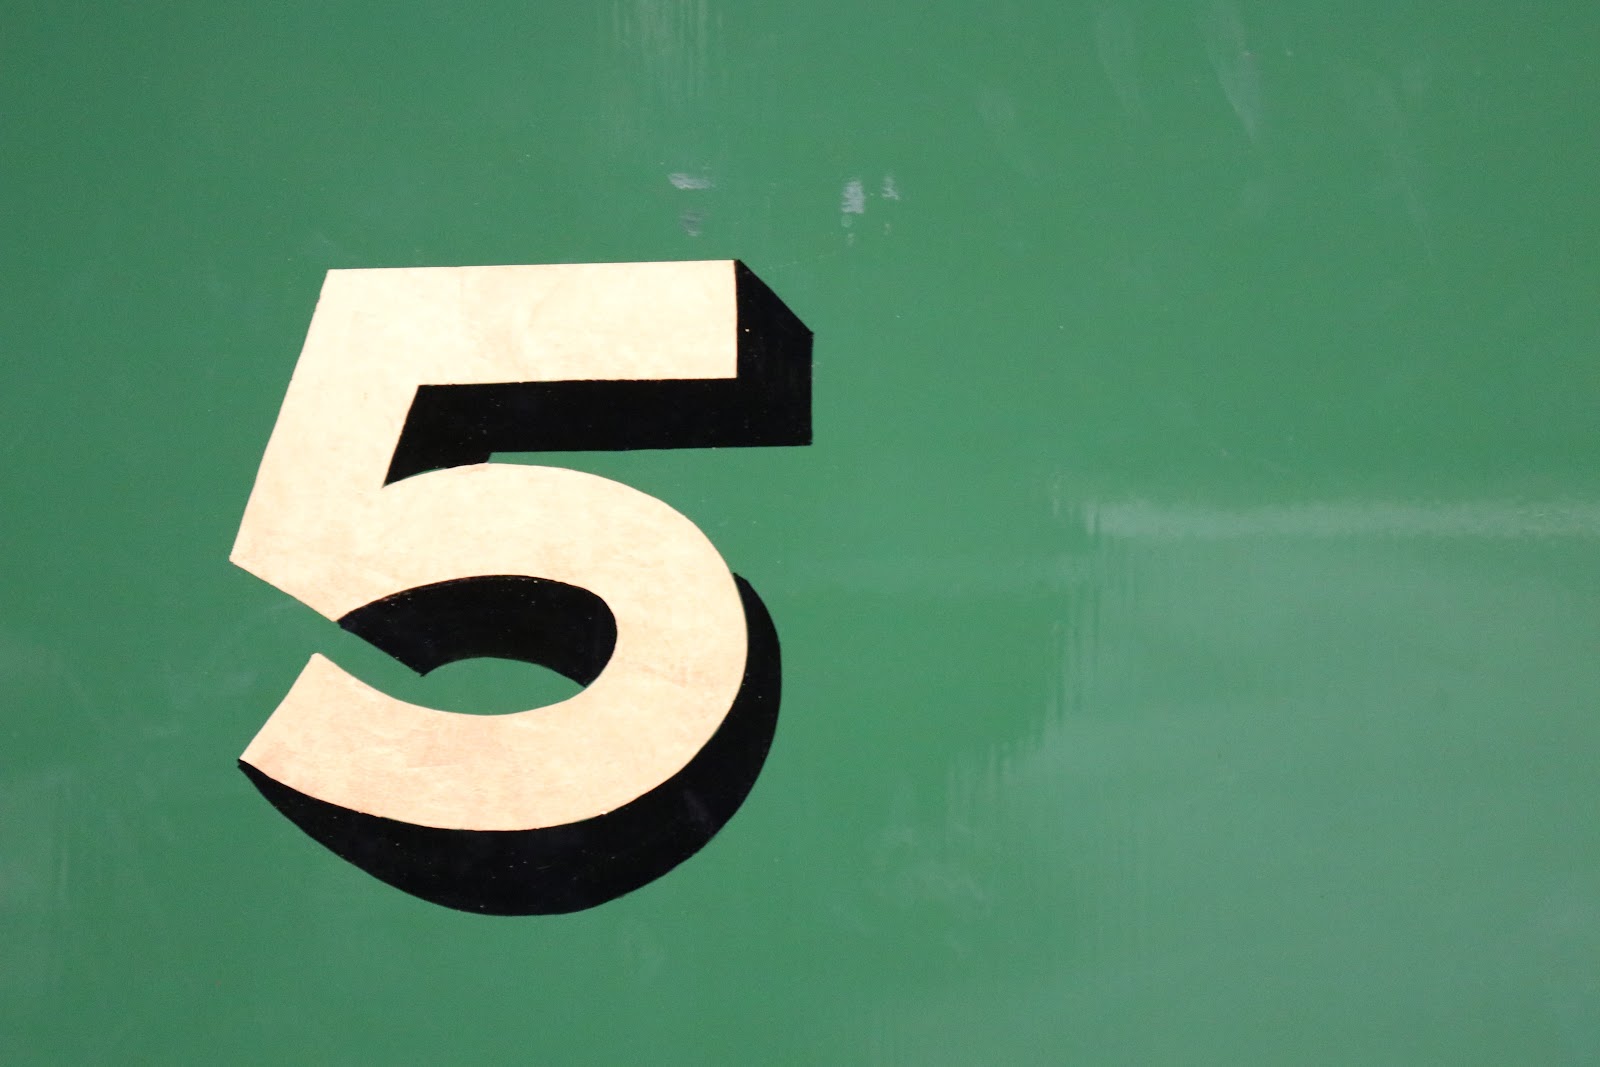 A number five appears on a green background